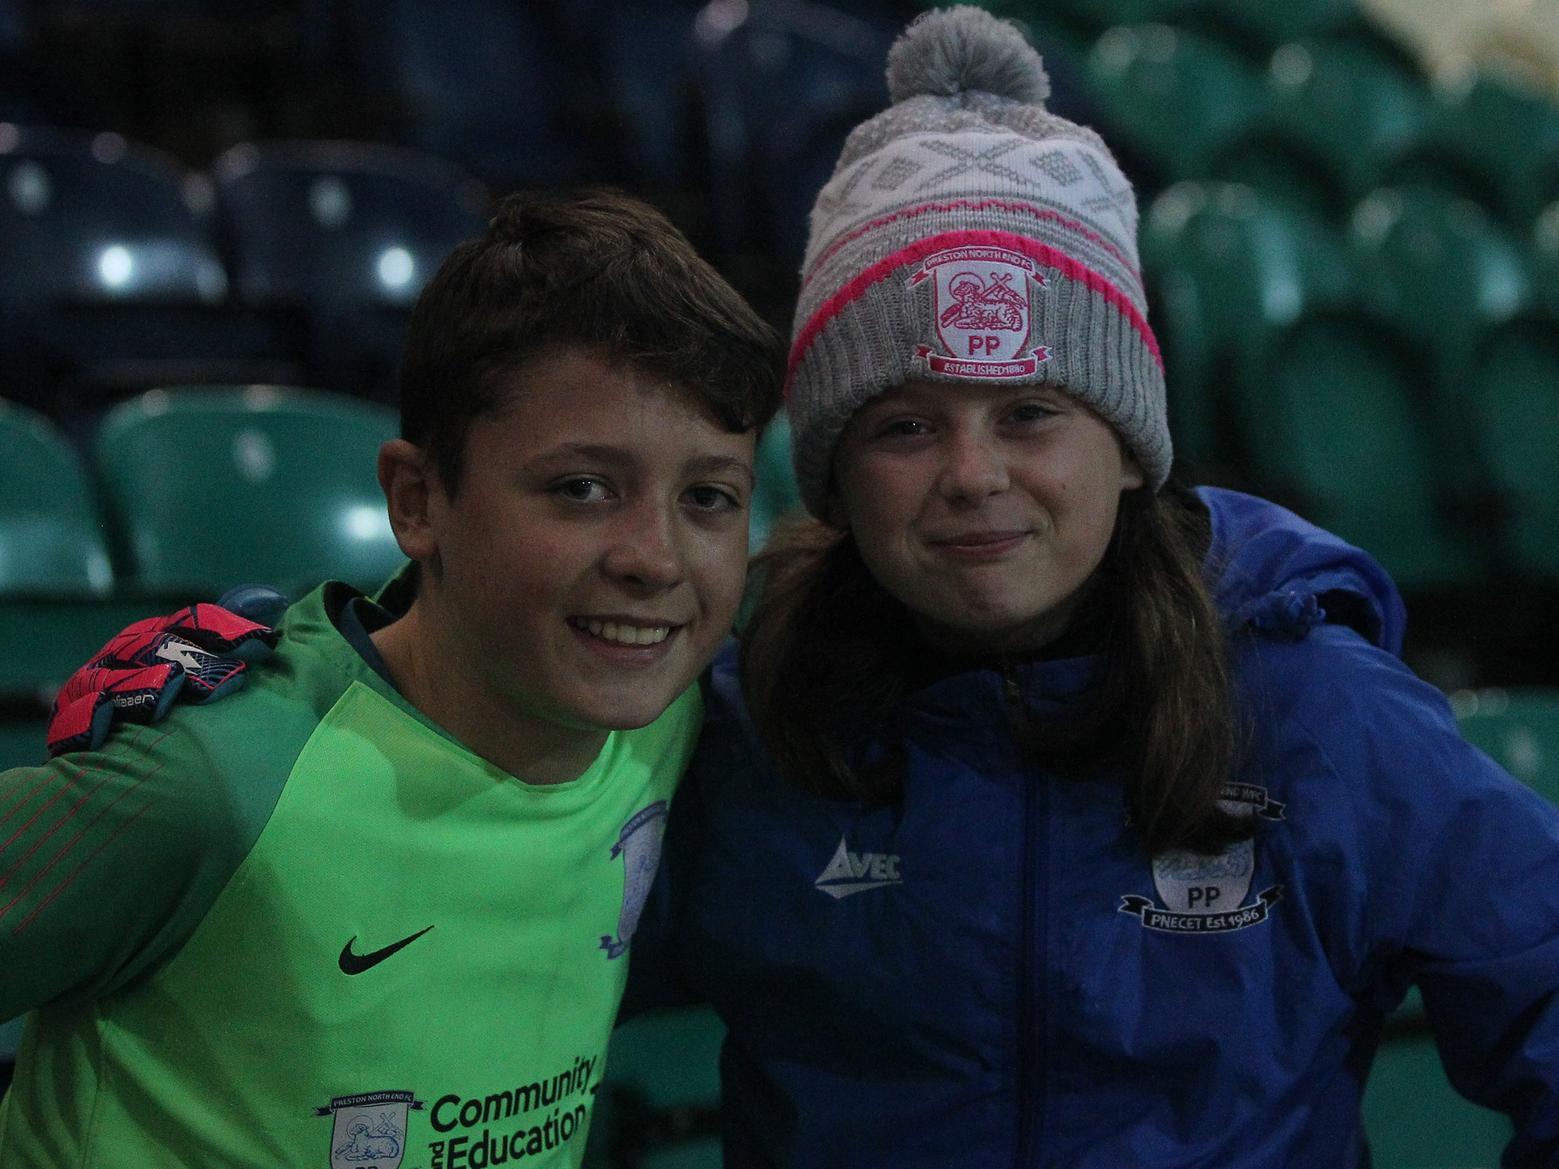 Two young fans smile despite the cold, with goalkeeper gloves favoured over the usual woolly ones.